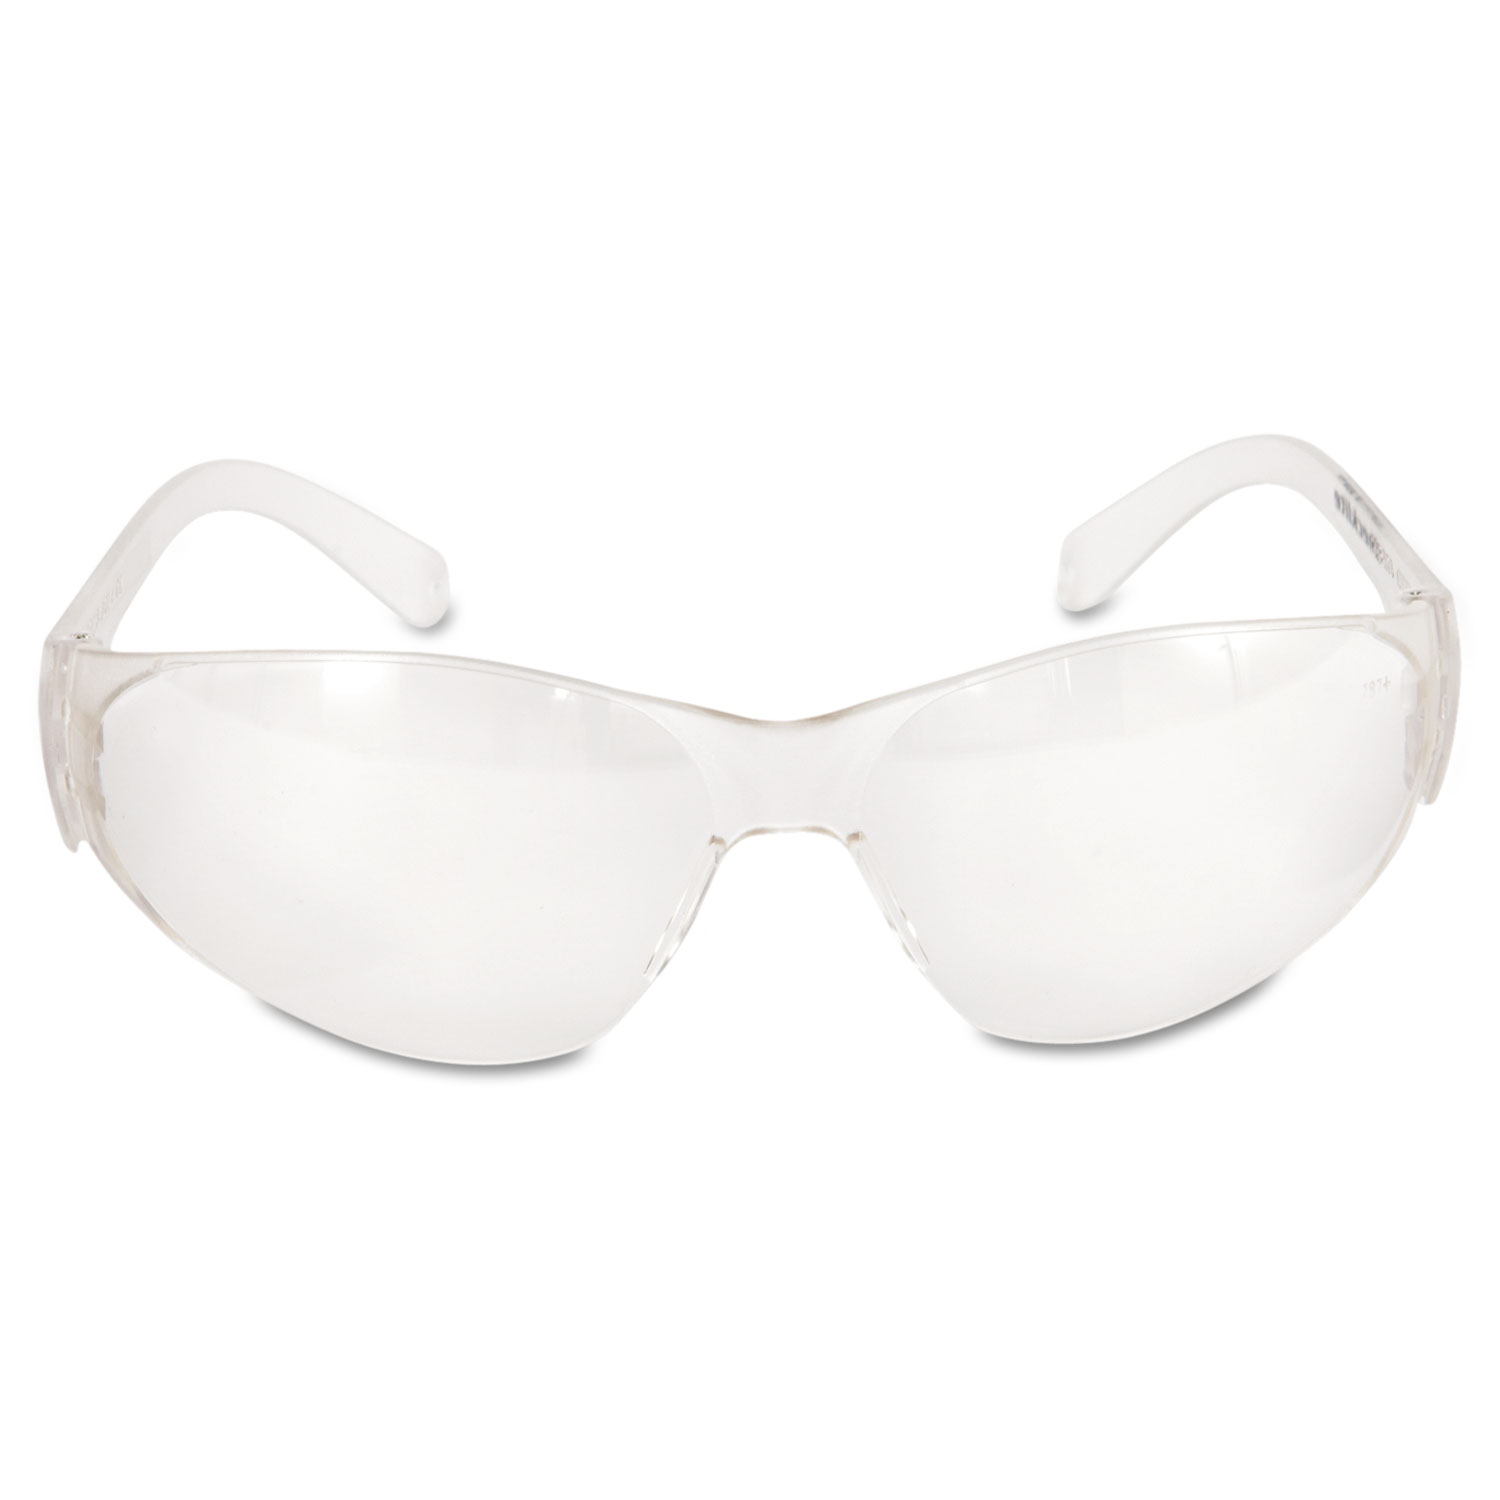 Mcr Safety Checklite Safety Glasses Uncoated Clear CL010 - image 2 of 3